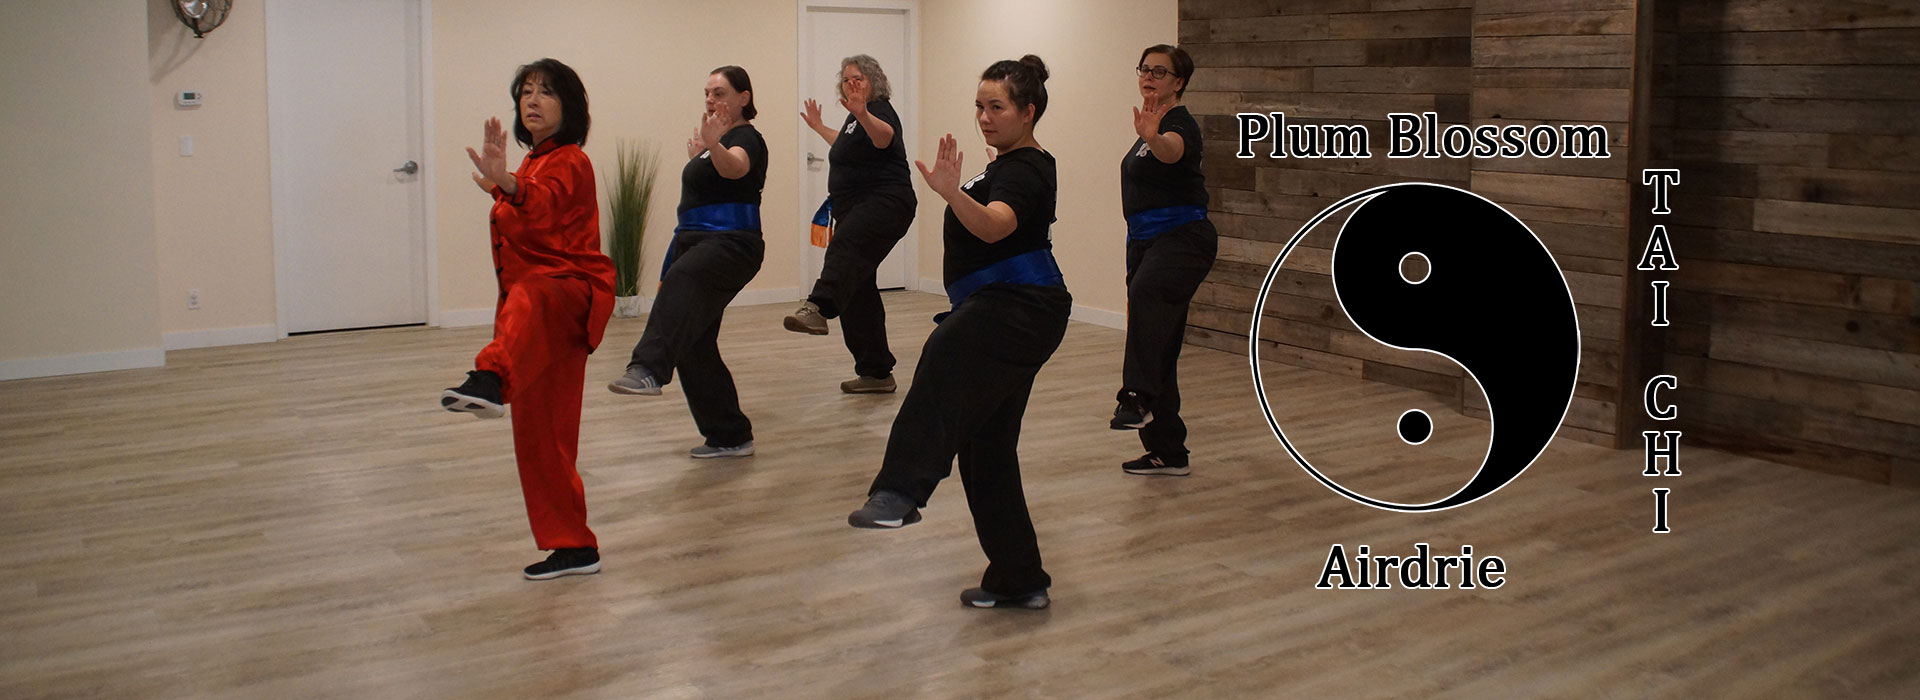 Contact Sifu Peggy Lupaschuk for more information on Plum Blossom Tai Chi located in Airdrie Alberta and serving all locations in and around Calgary.